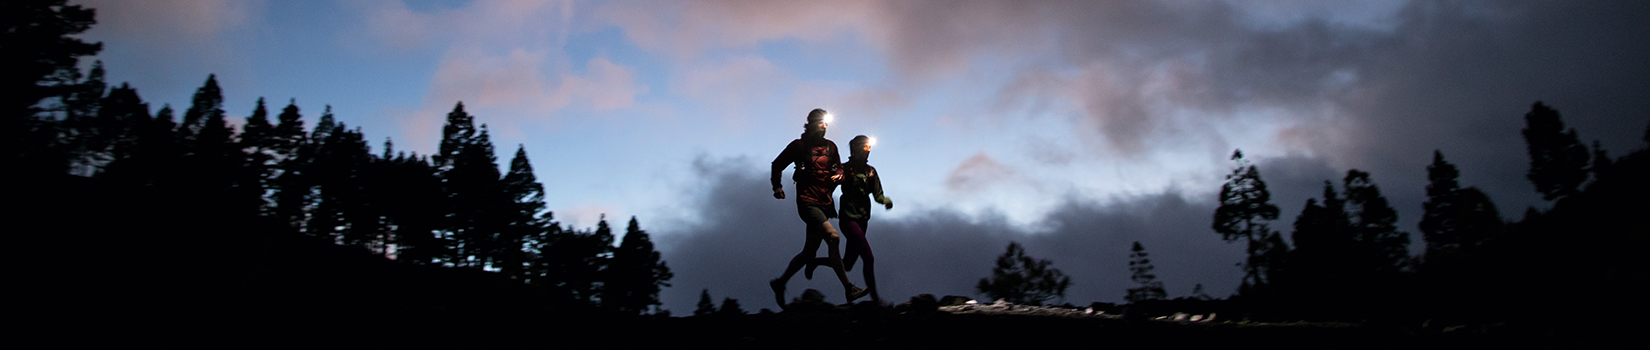 Two runners with headlamps in the dark